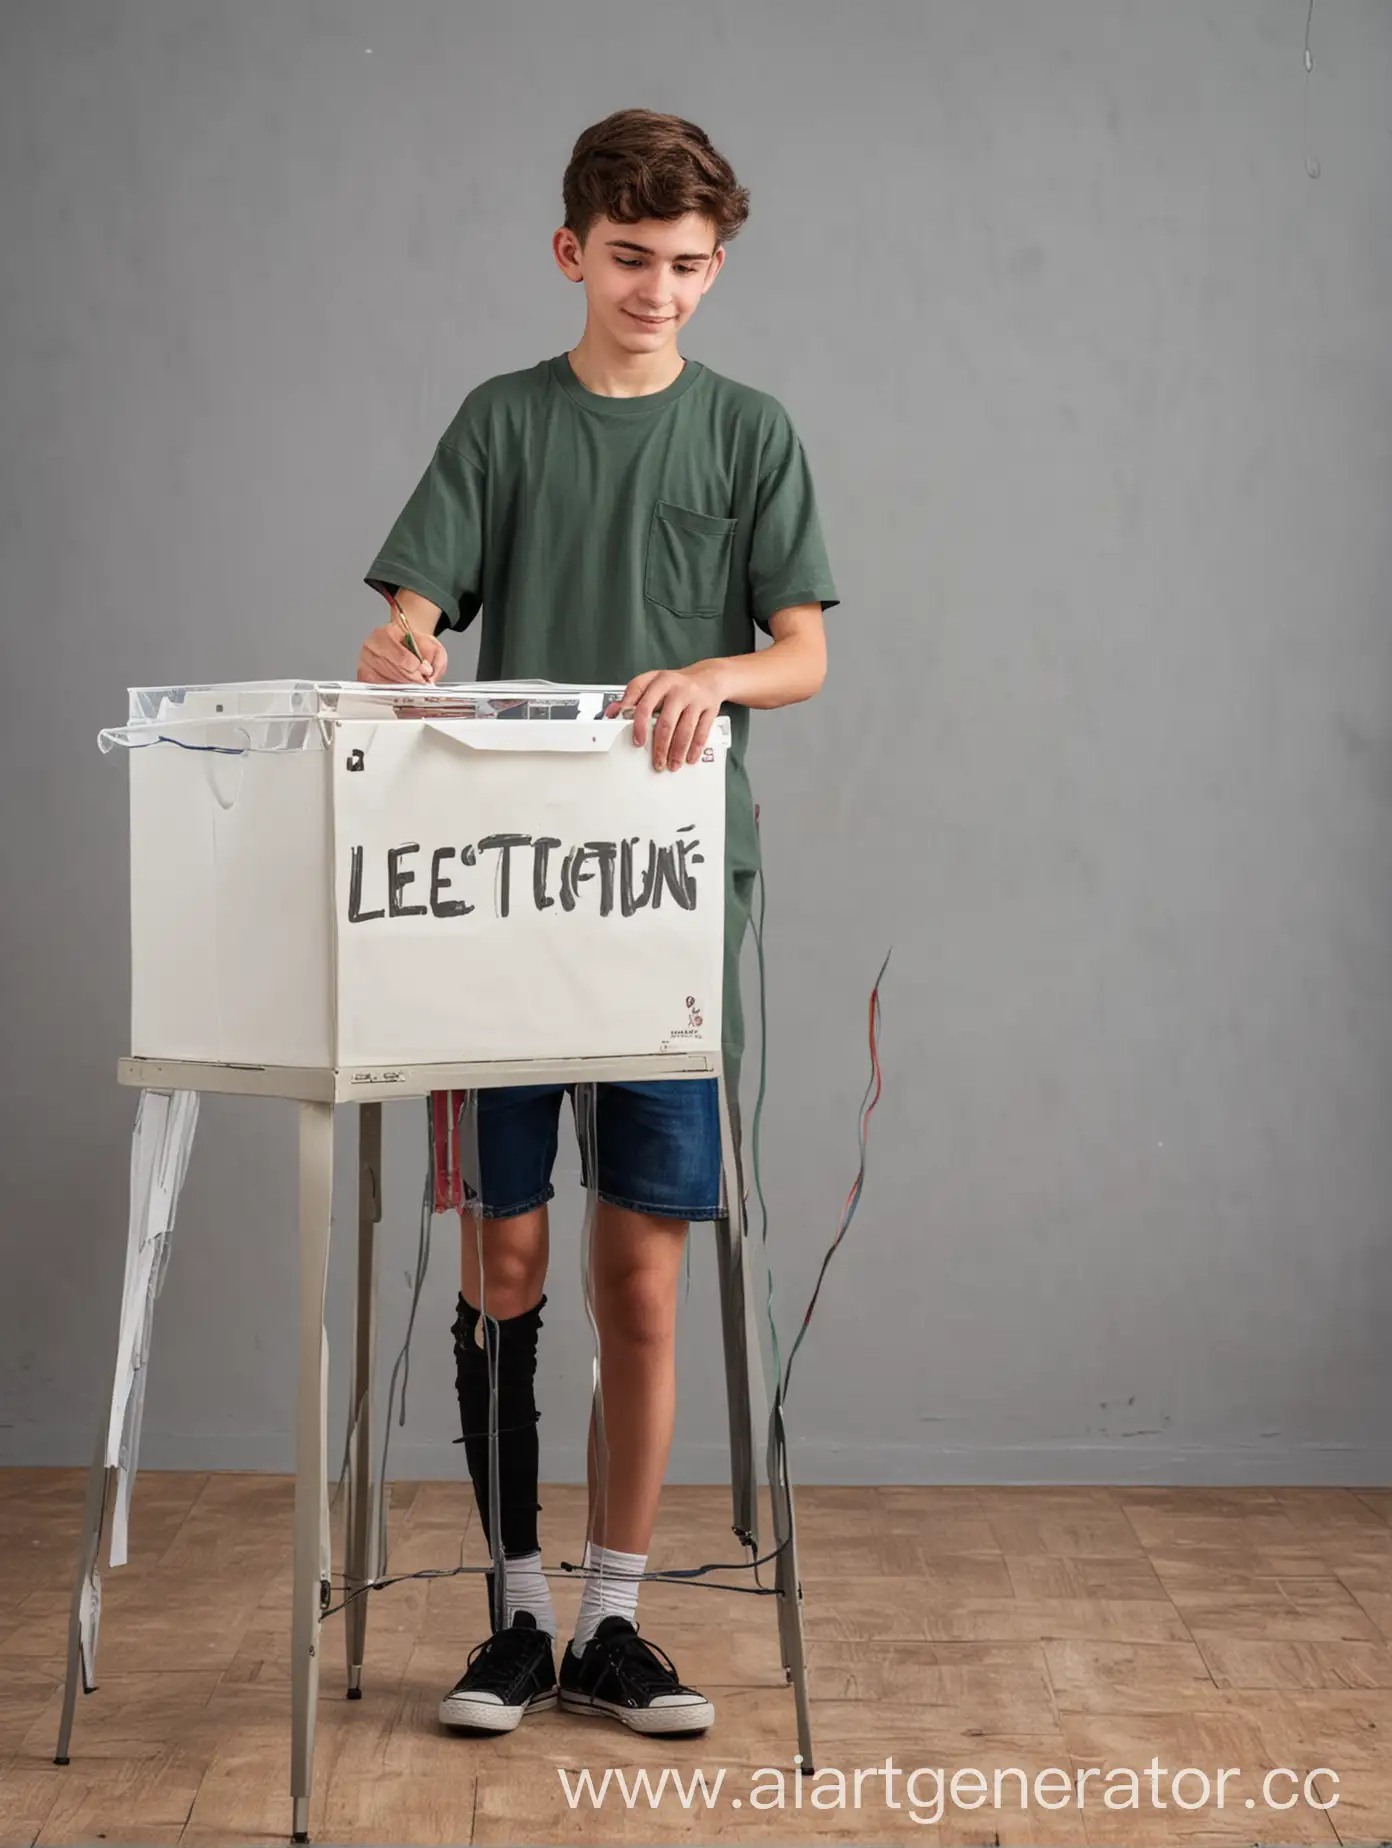 Teenager-Voting-in-Elections-Civic-Engagement-and-Youth-Participation